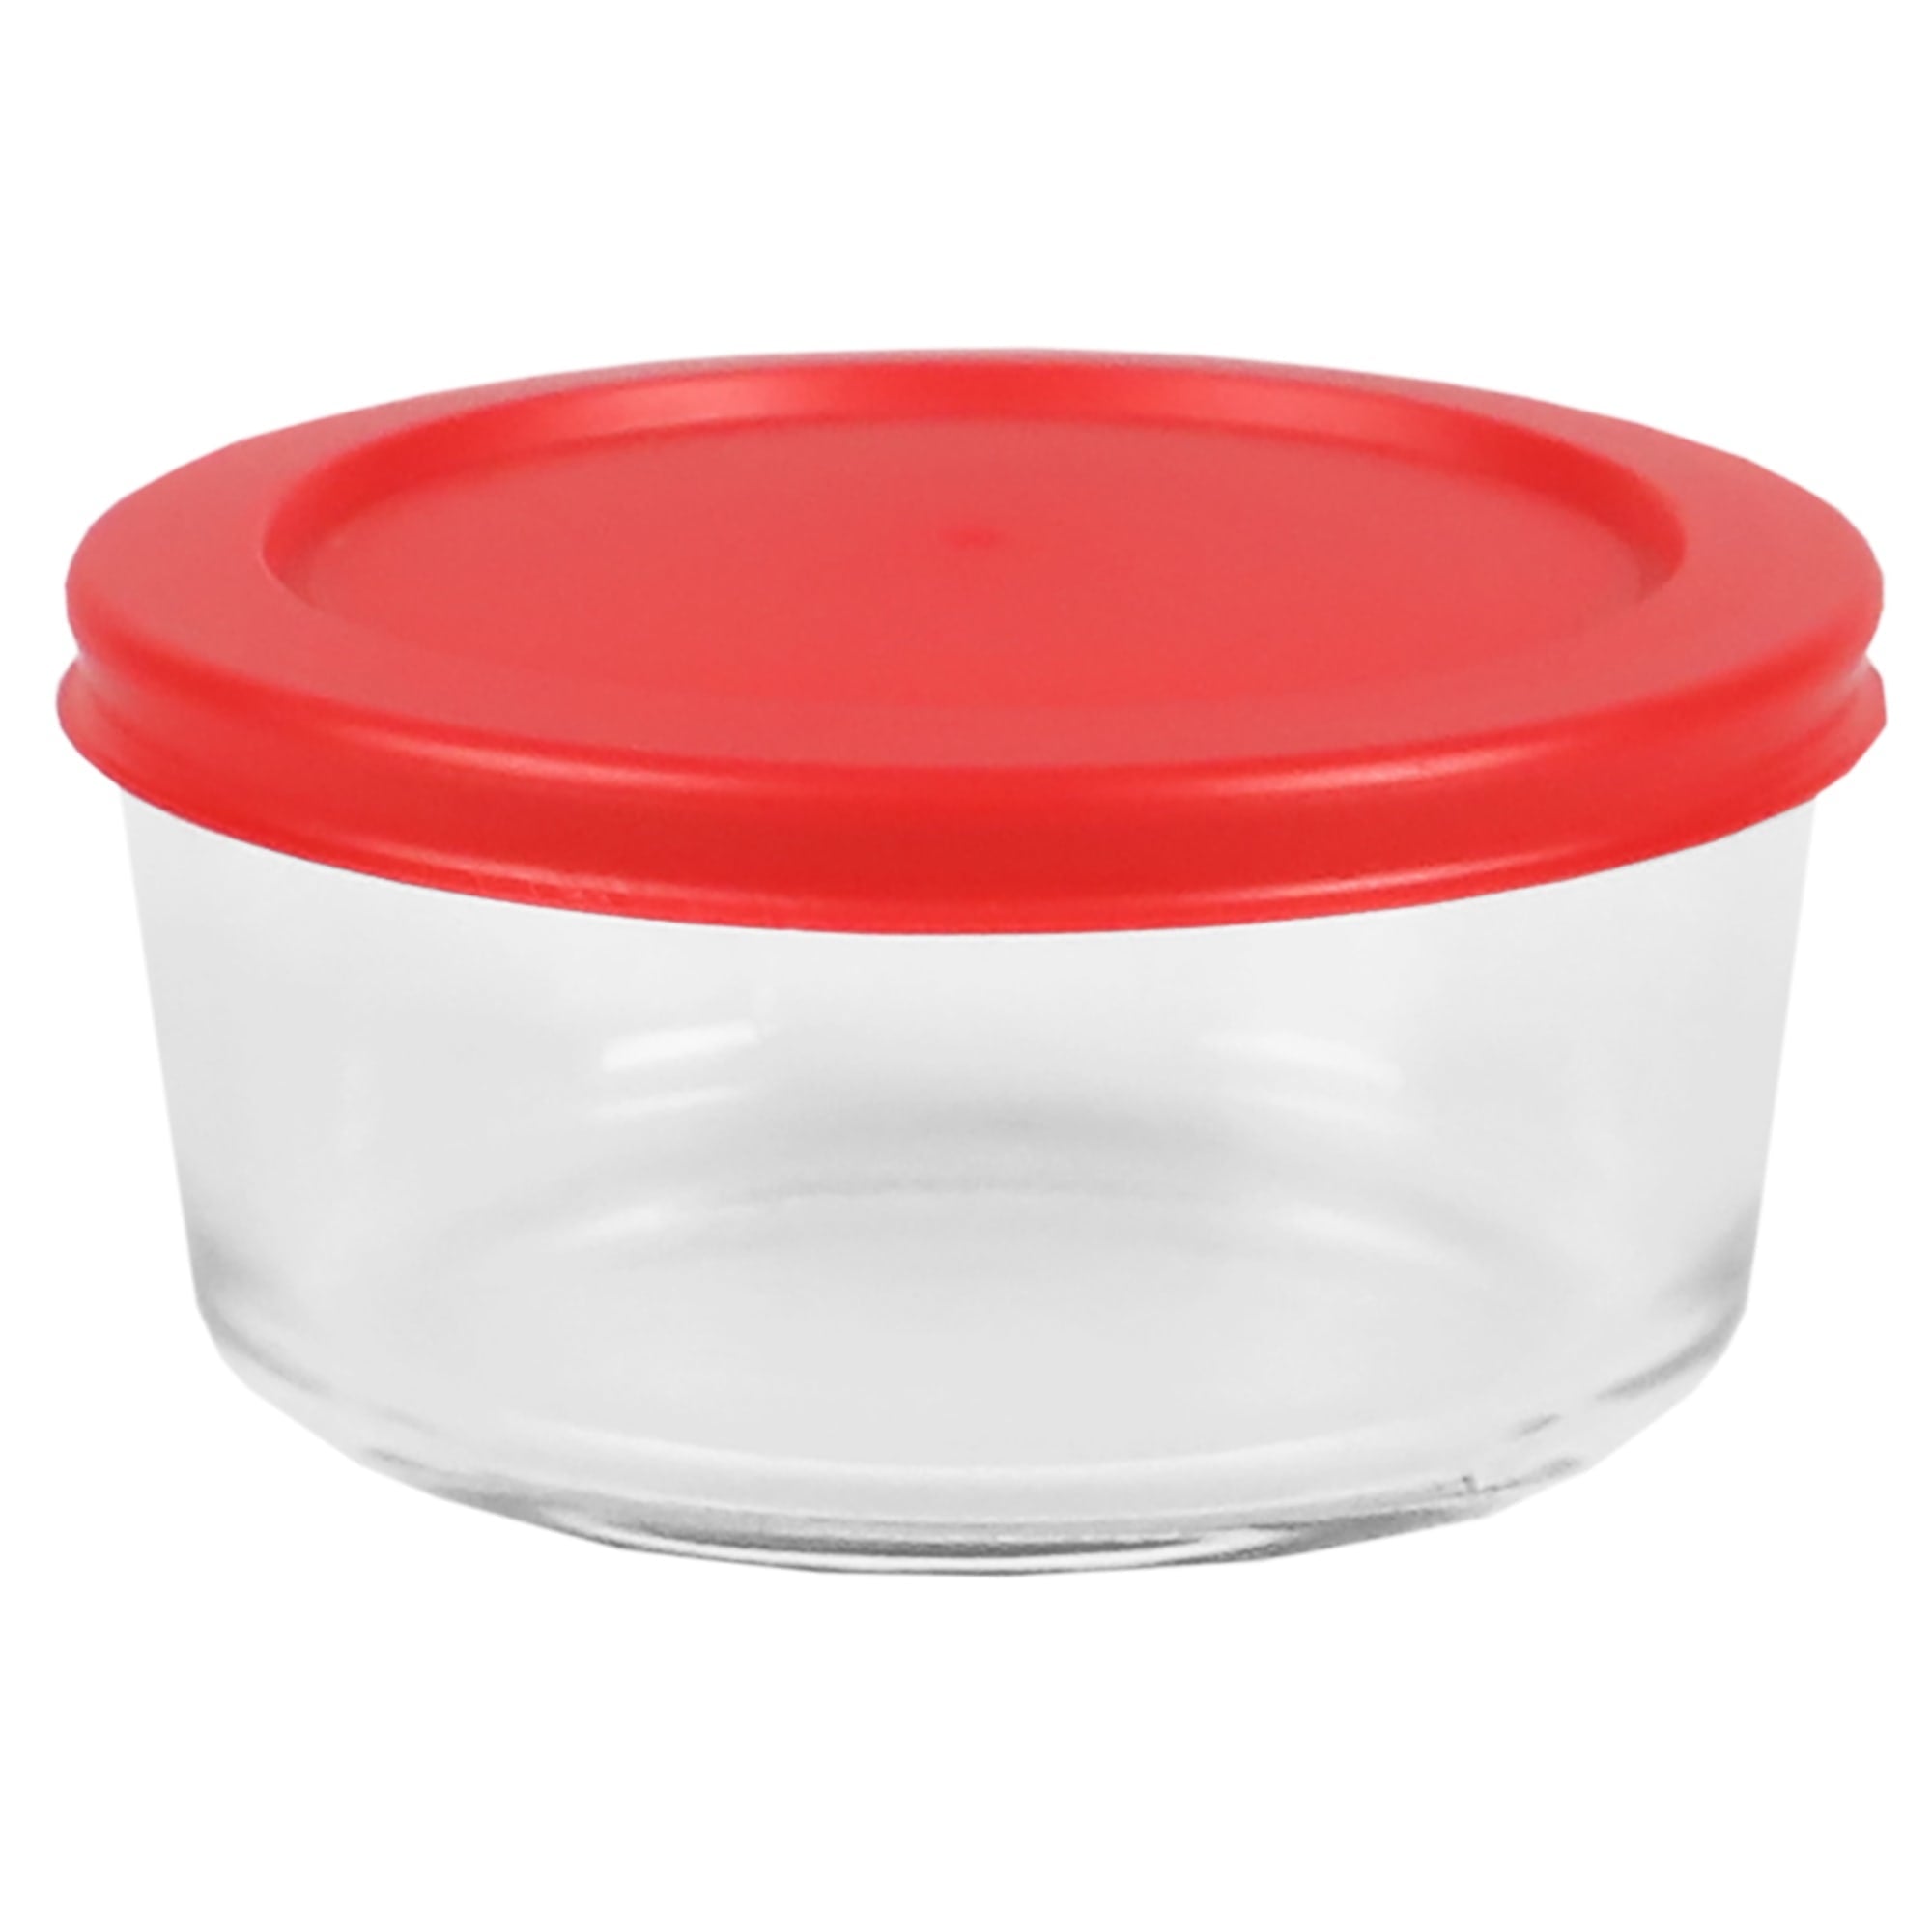 Home Basics 16 oz. Round Glass Food Storage Container with Red Lid